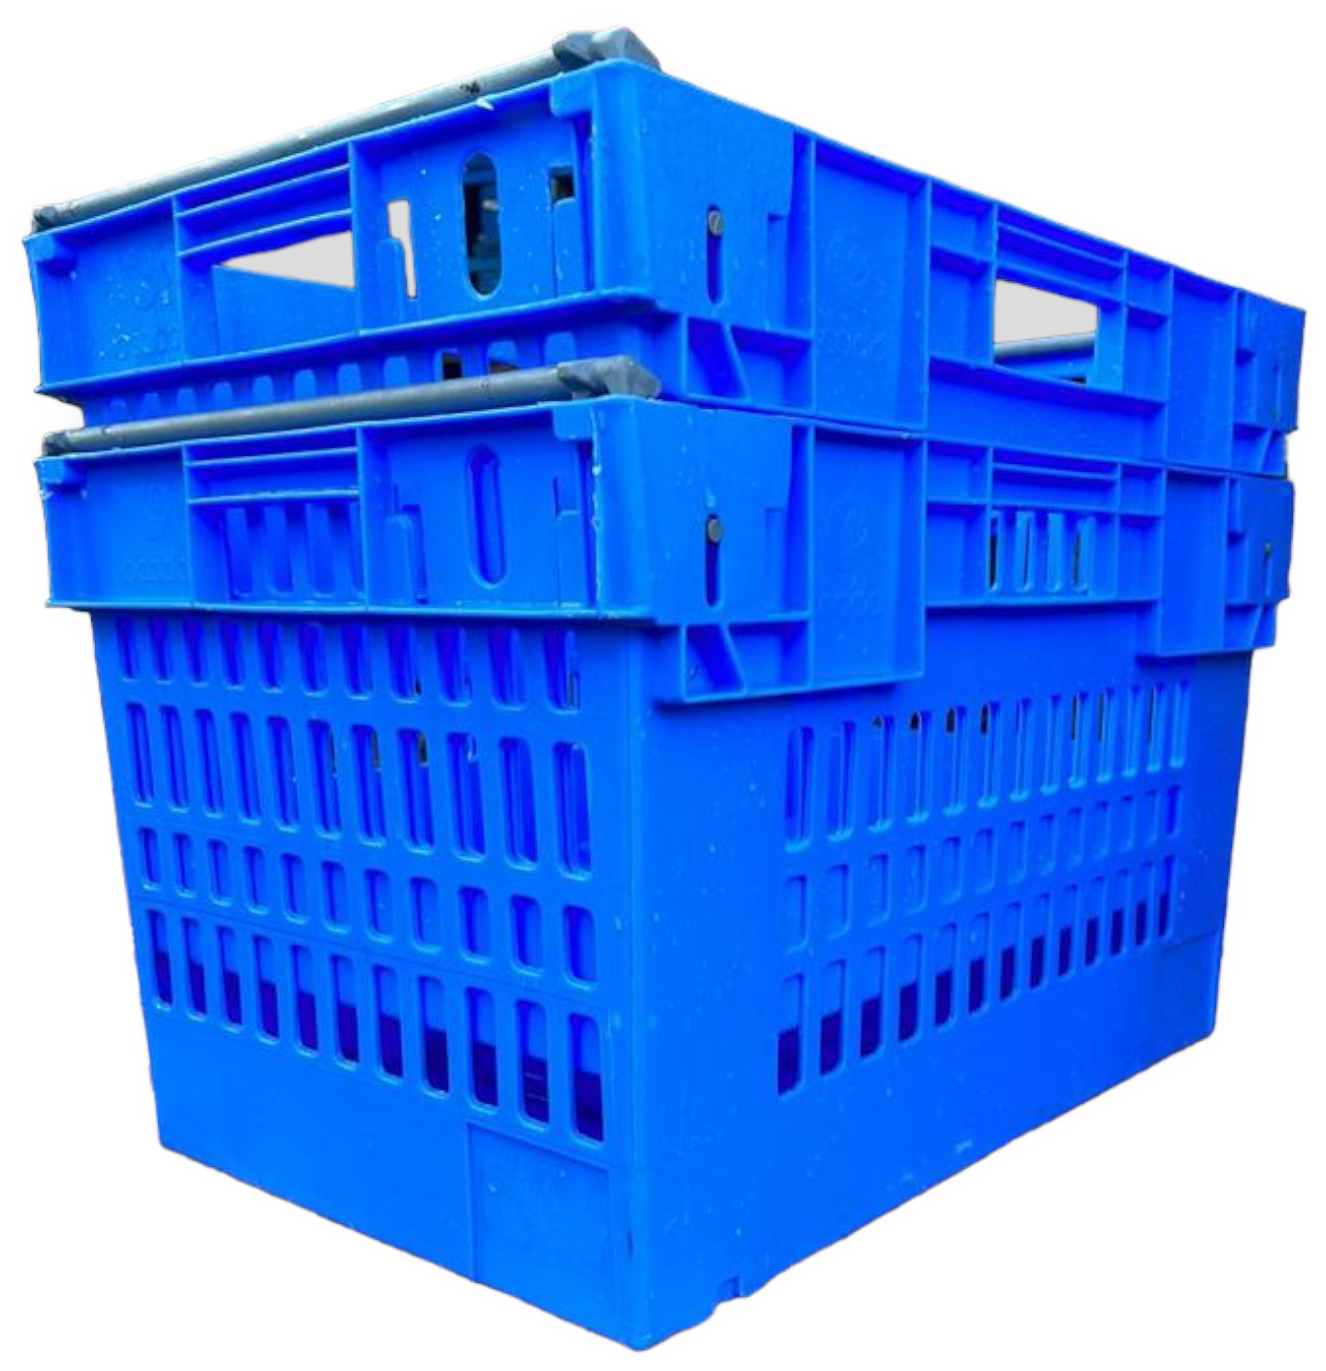 400x300x185 Bale Arm Crate Black 15LTR - Pack of 14 For Transportation